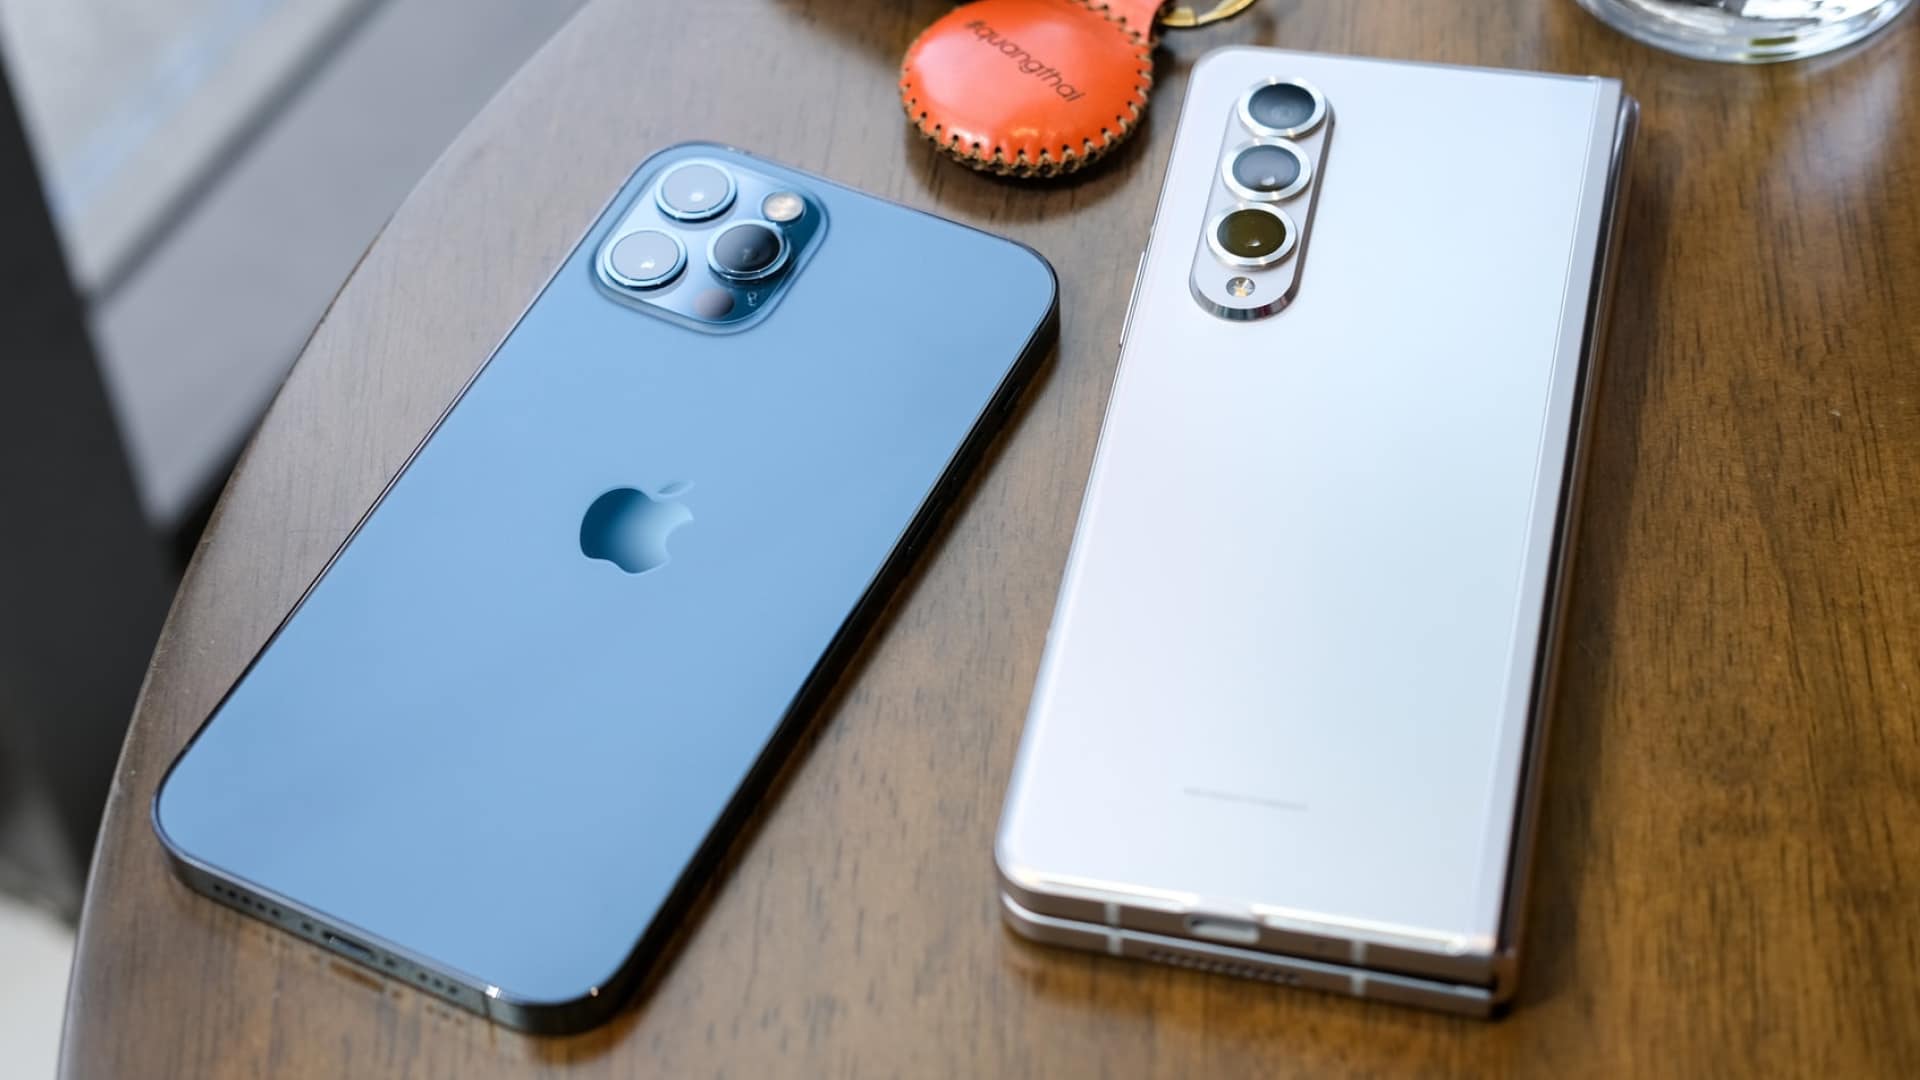 iPhone 12 Pro and Galaxy Fold 2 flipped on table